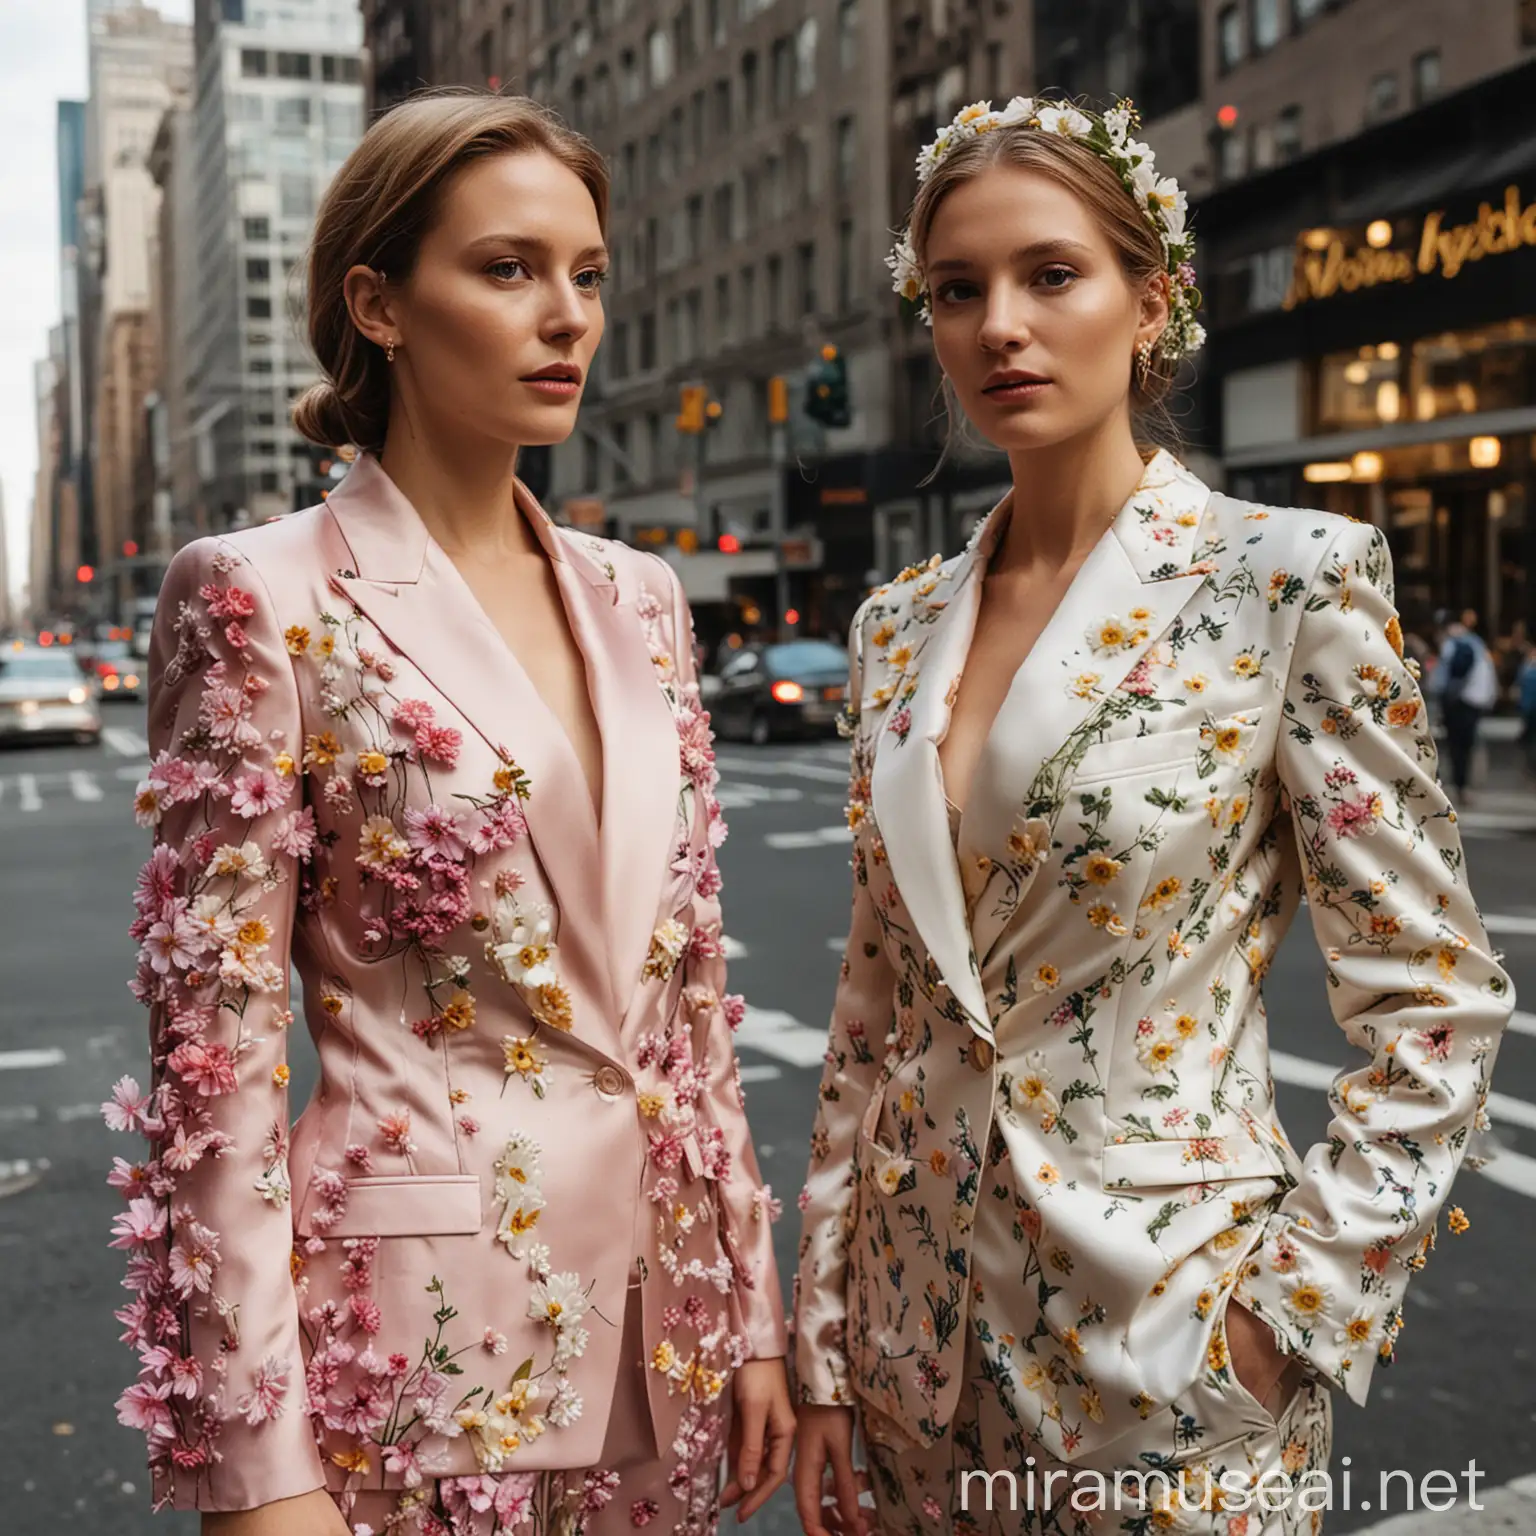 Two women wearing silk suits, faces fully covered with flowers standing in Manhattan